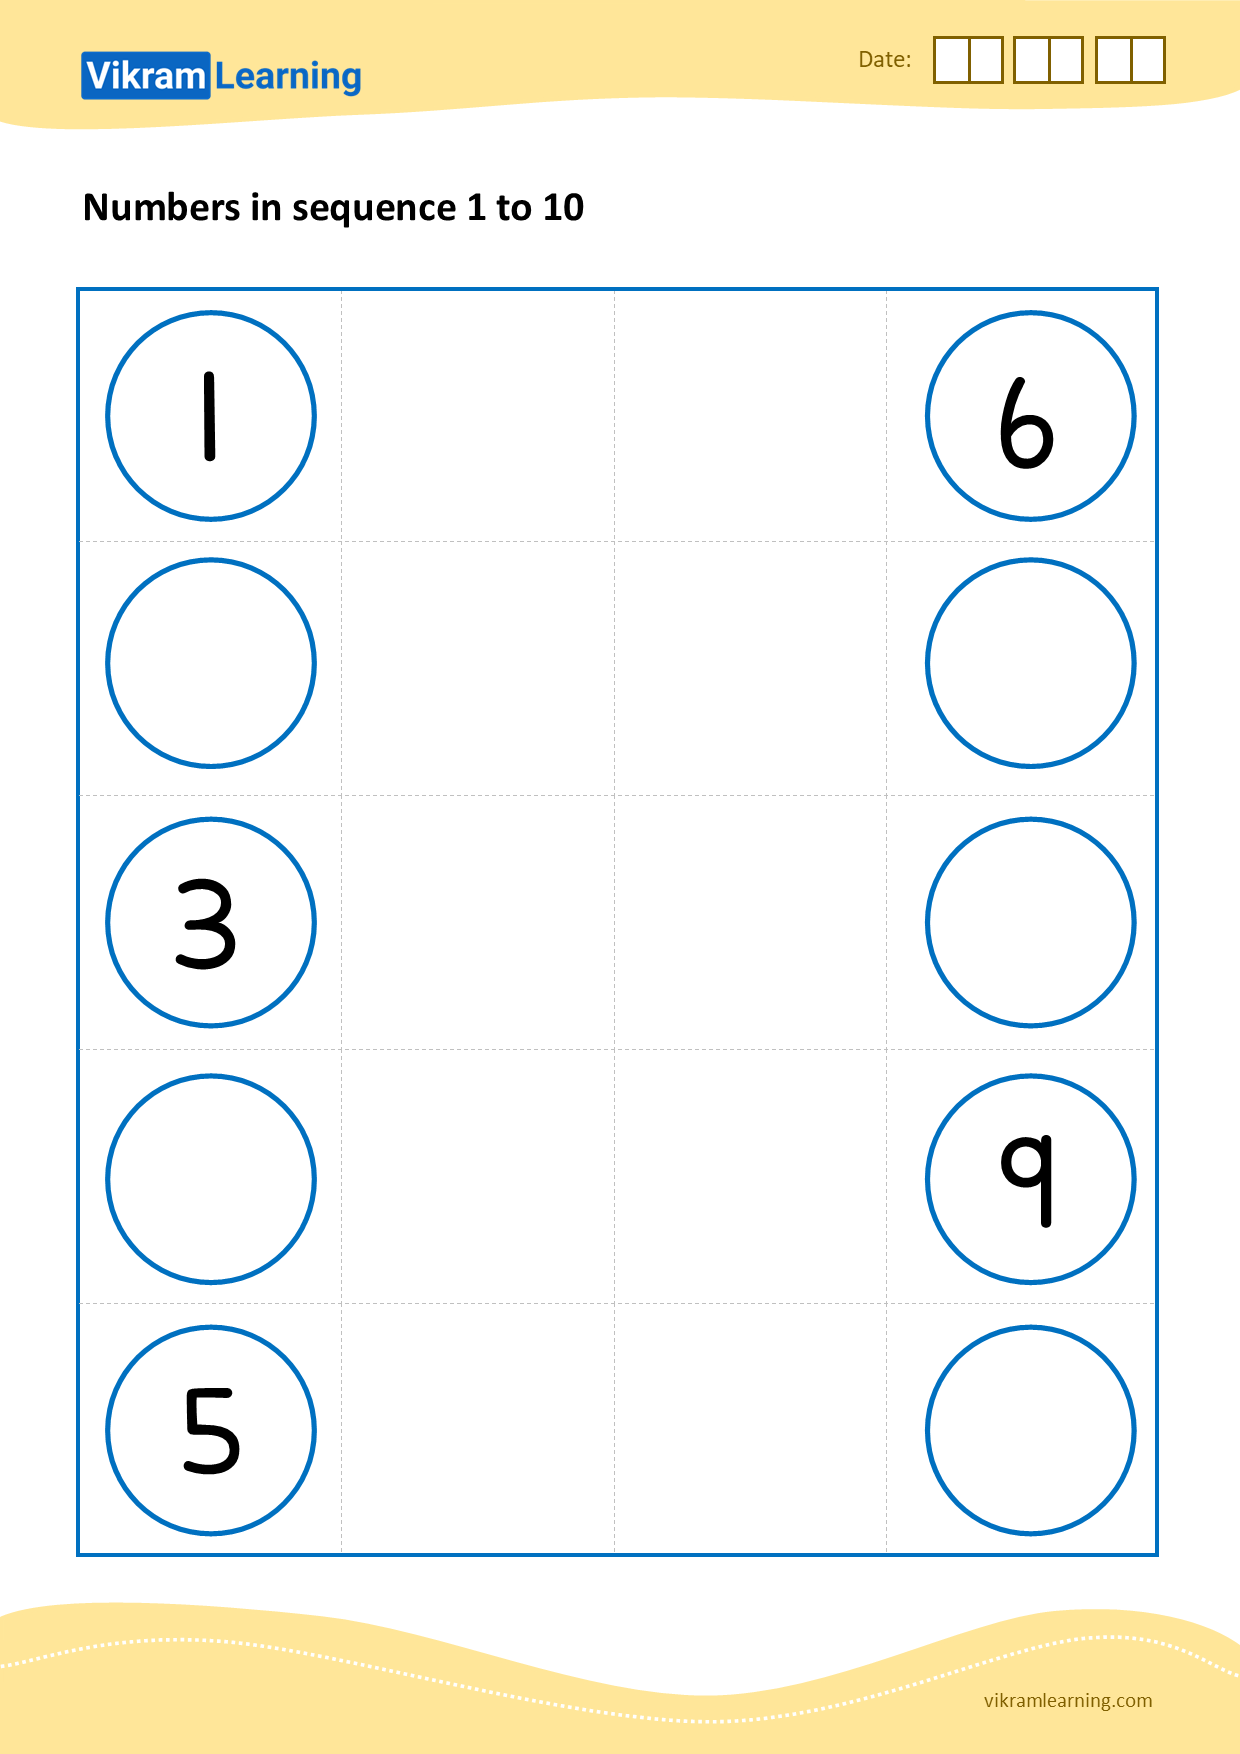 Download numbers in sequence 1 to 10 - pattern 1 worksheets